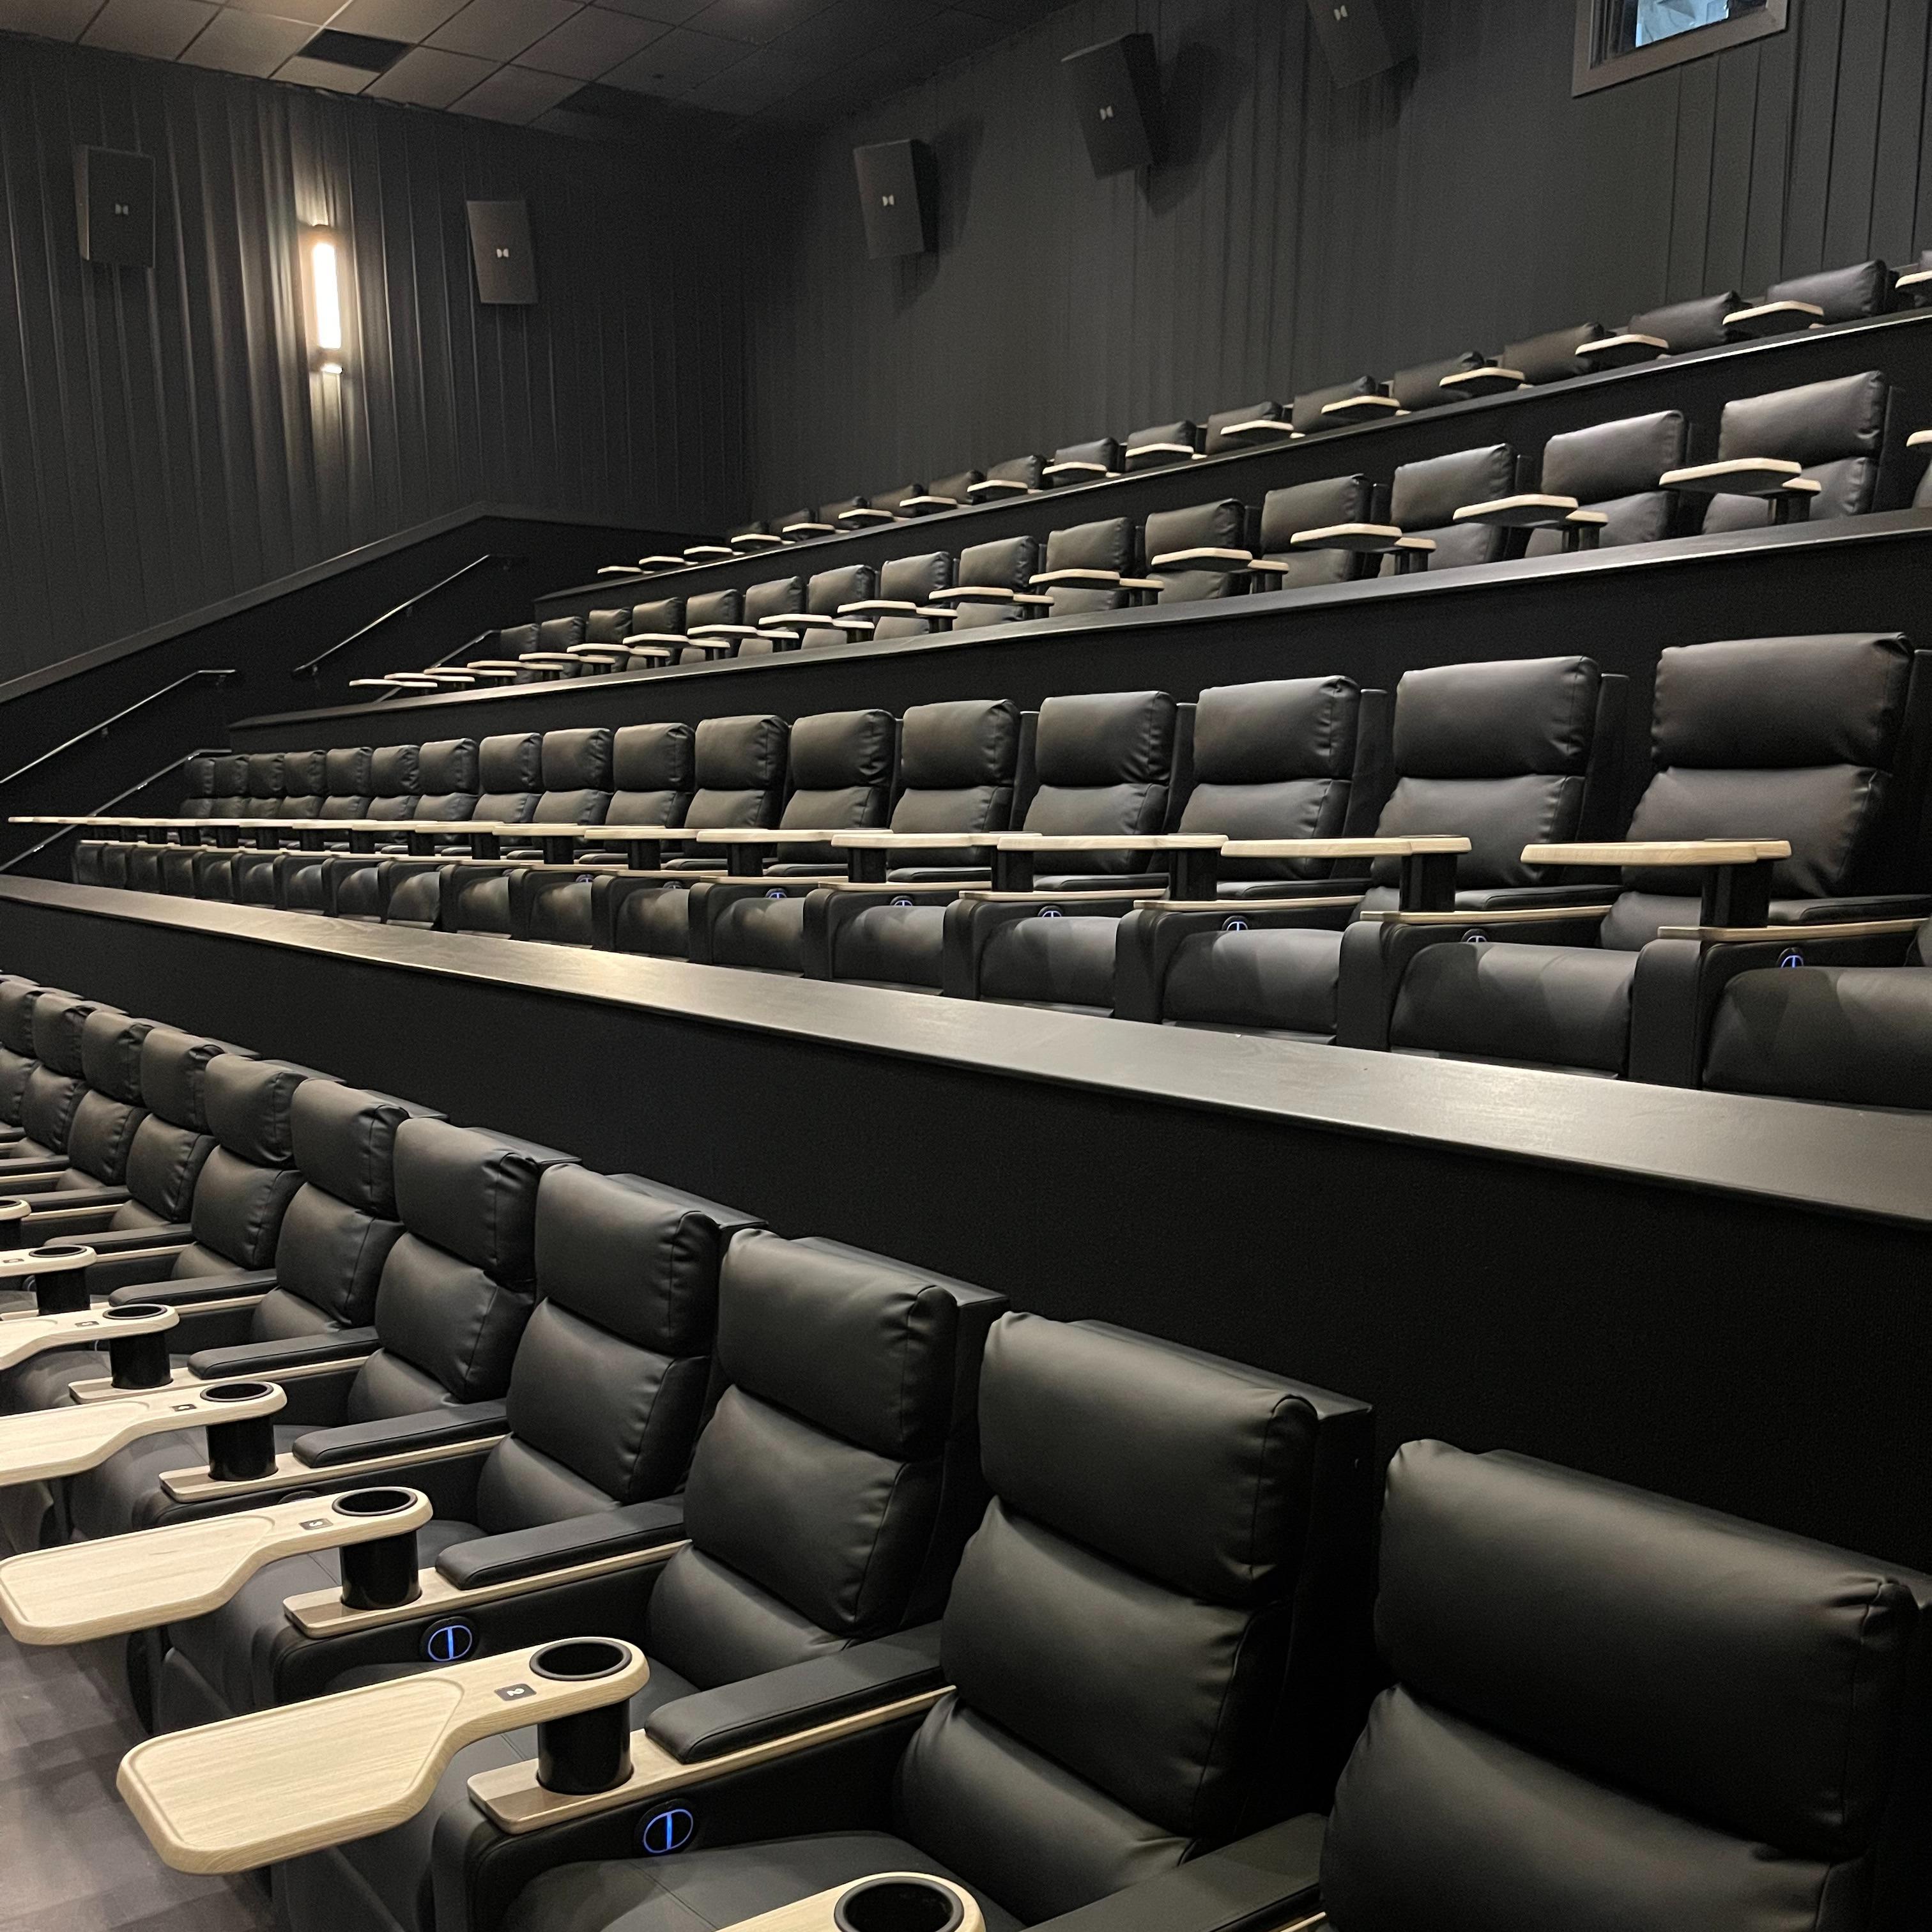 The Surprise location will feature eight movie theaters with luxury reclining seats and food delivered directly to the seat. Additional movie theater features include Dolby Atmos sound, extra wide aisles, and privacy walls to enhance the viewing and dining experience.